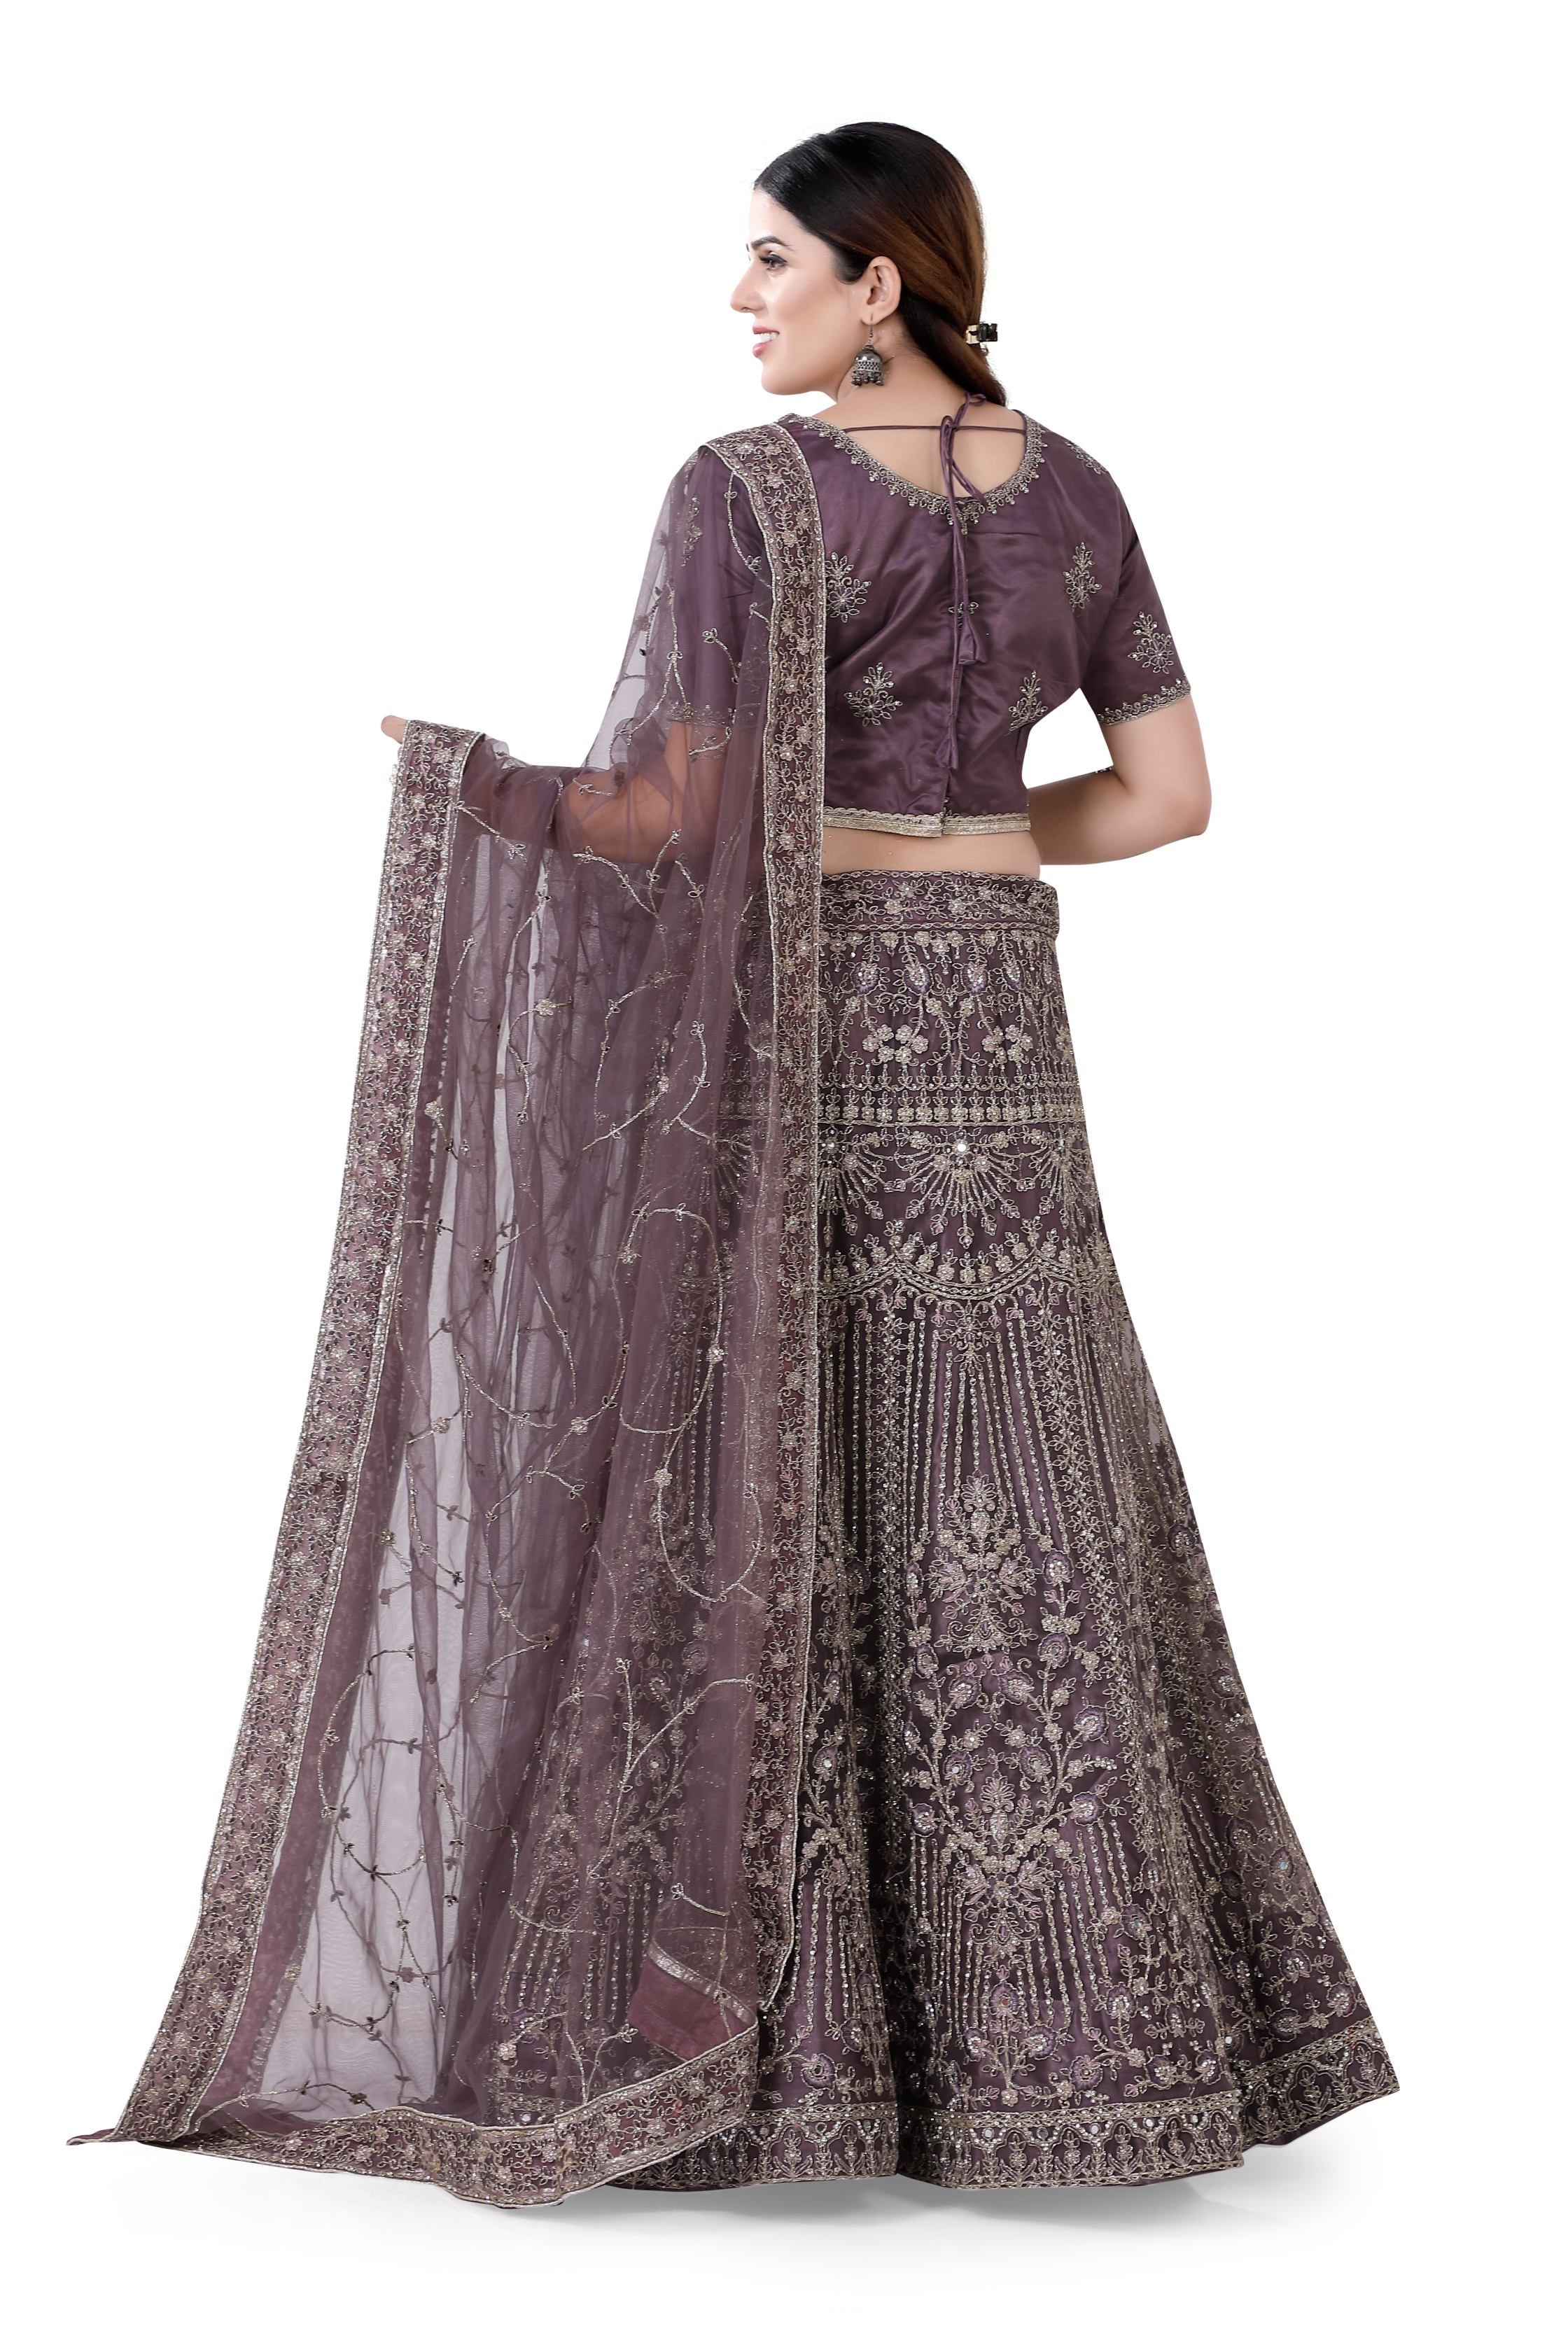 Net Lehenga Choli-Wine Color - Premium Partywear Lehenga from Dulhan Exclusives - Just $550! Shop now at Dulhan Exclusives